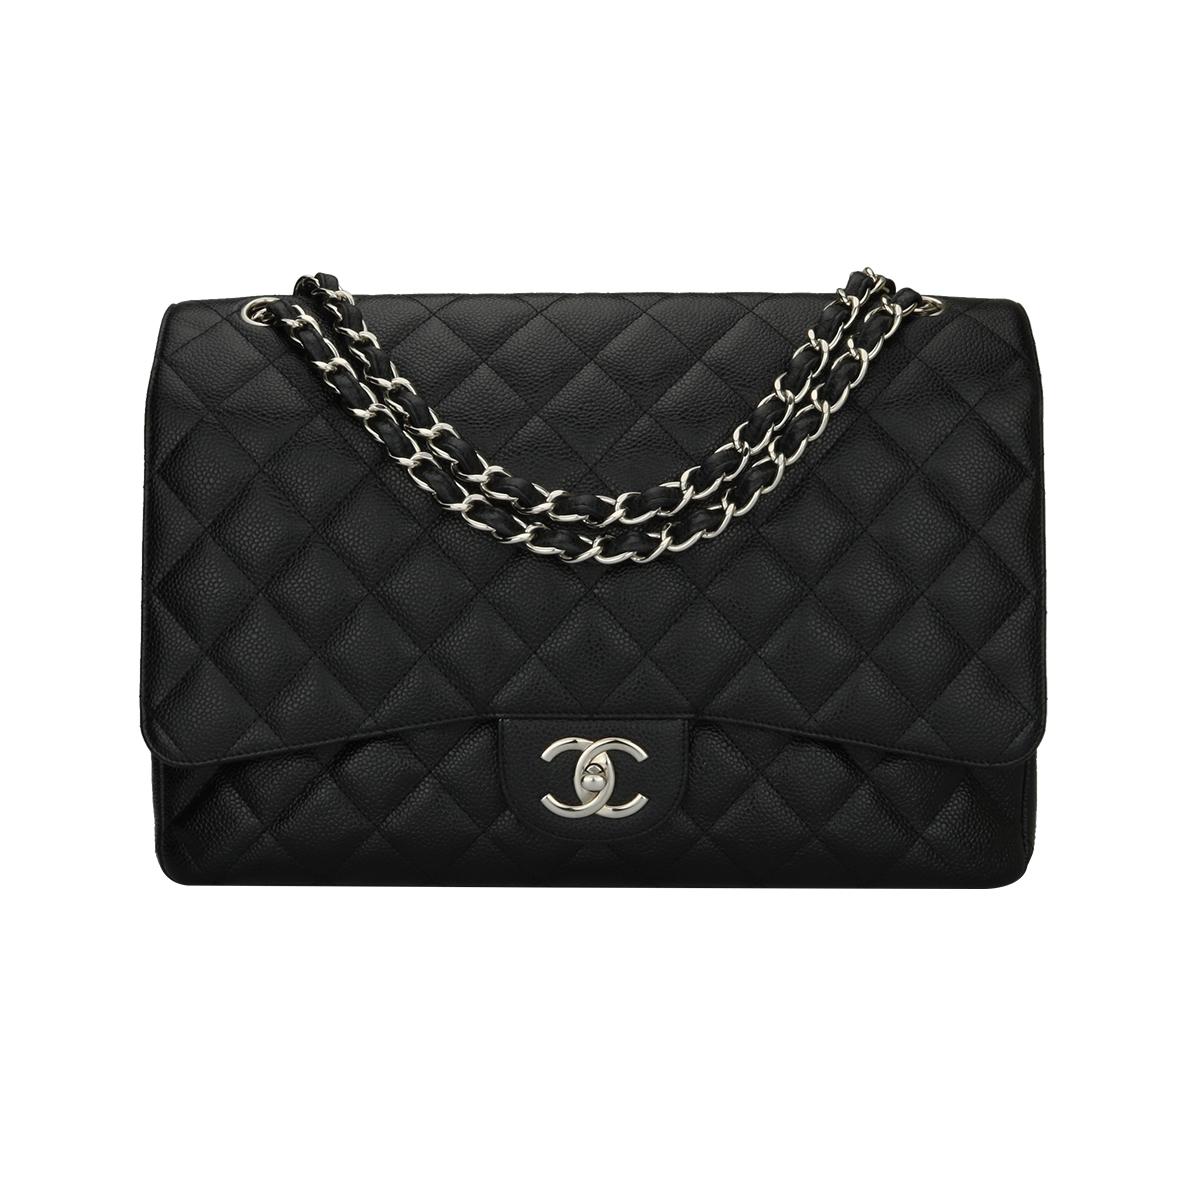 CHANEL Black Caviar Maxi Double Flap with Silver Hardware 2012